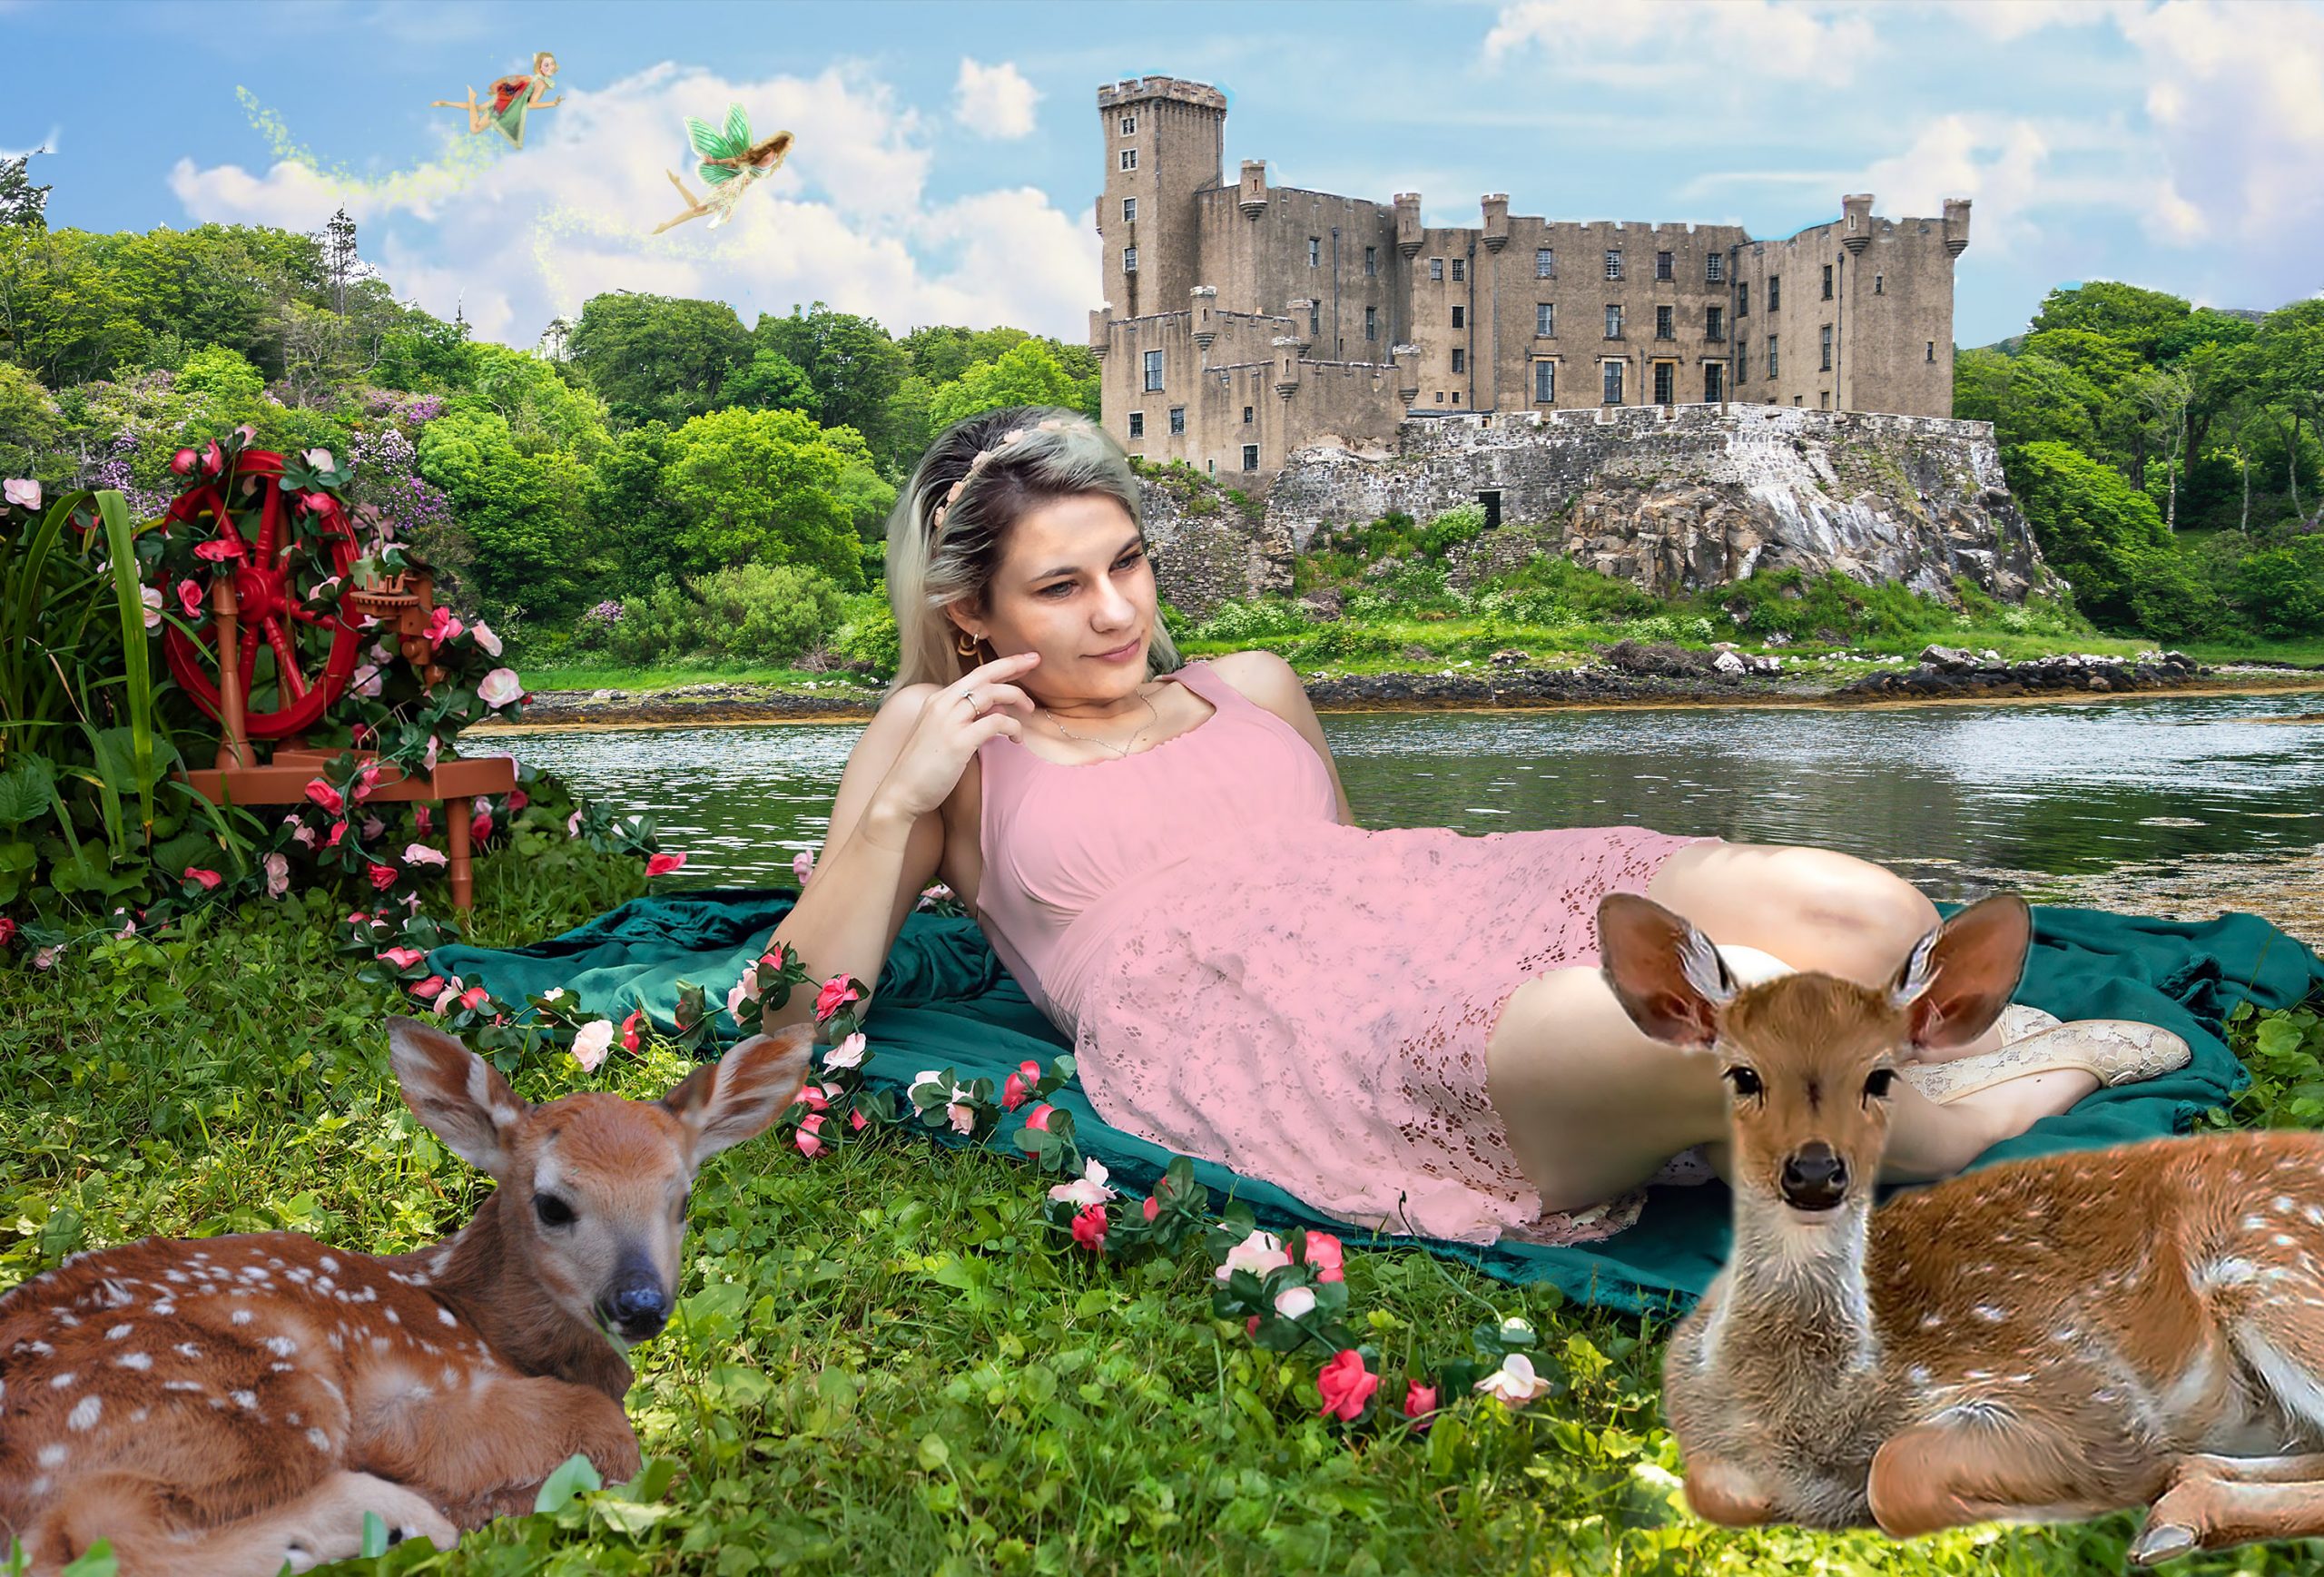 Photoshopped graphic of girl laying on a blanket besides a lake with two deer, with a caster and fairies behind her